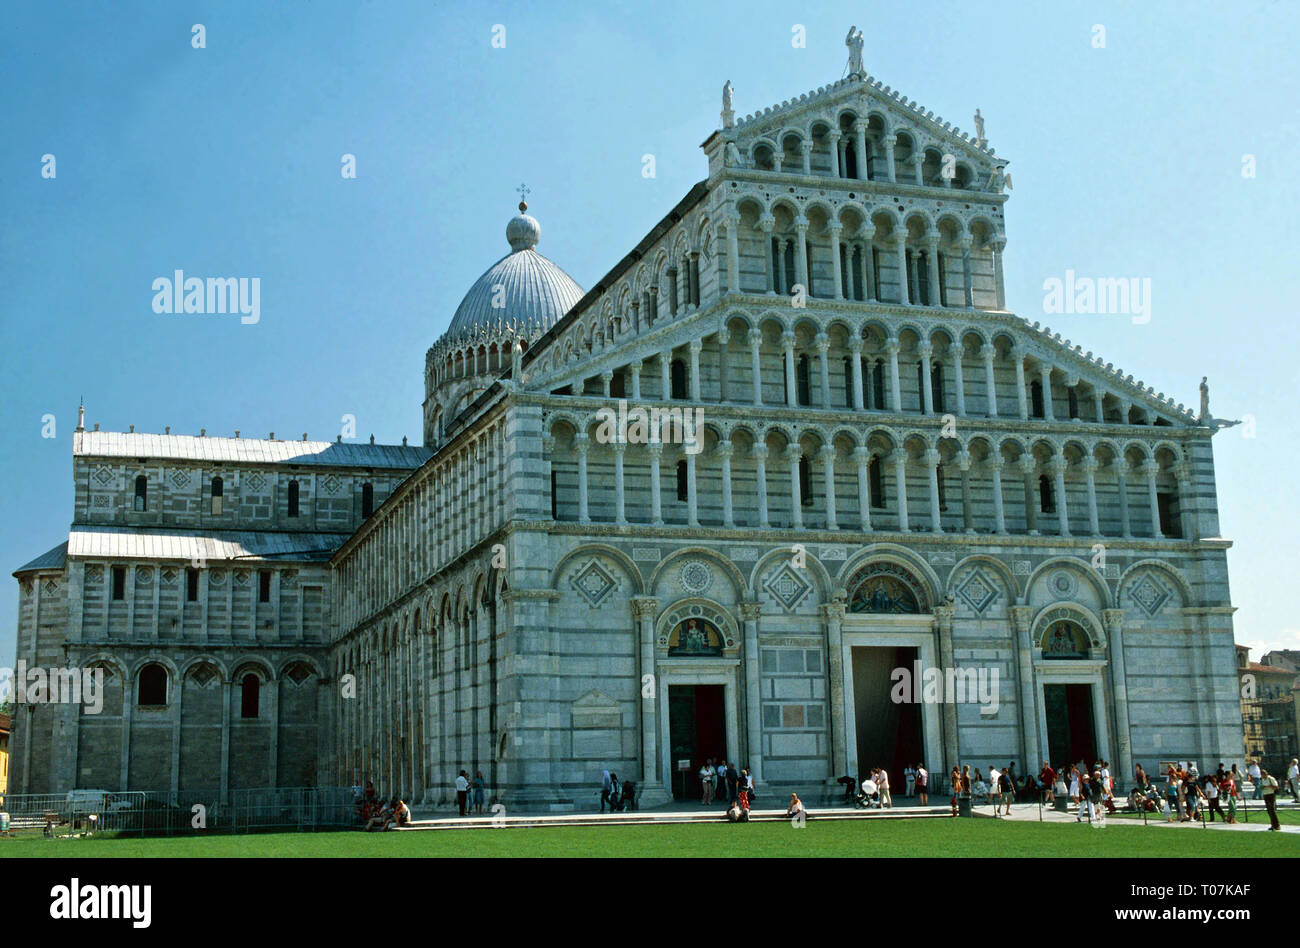 The Duomo in the Field of Miracles,Pisa,Italy Stock Photo